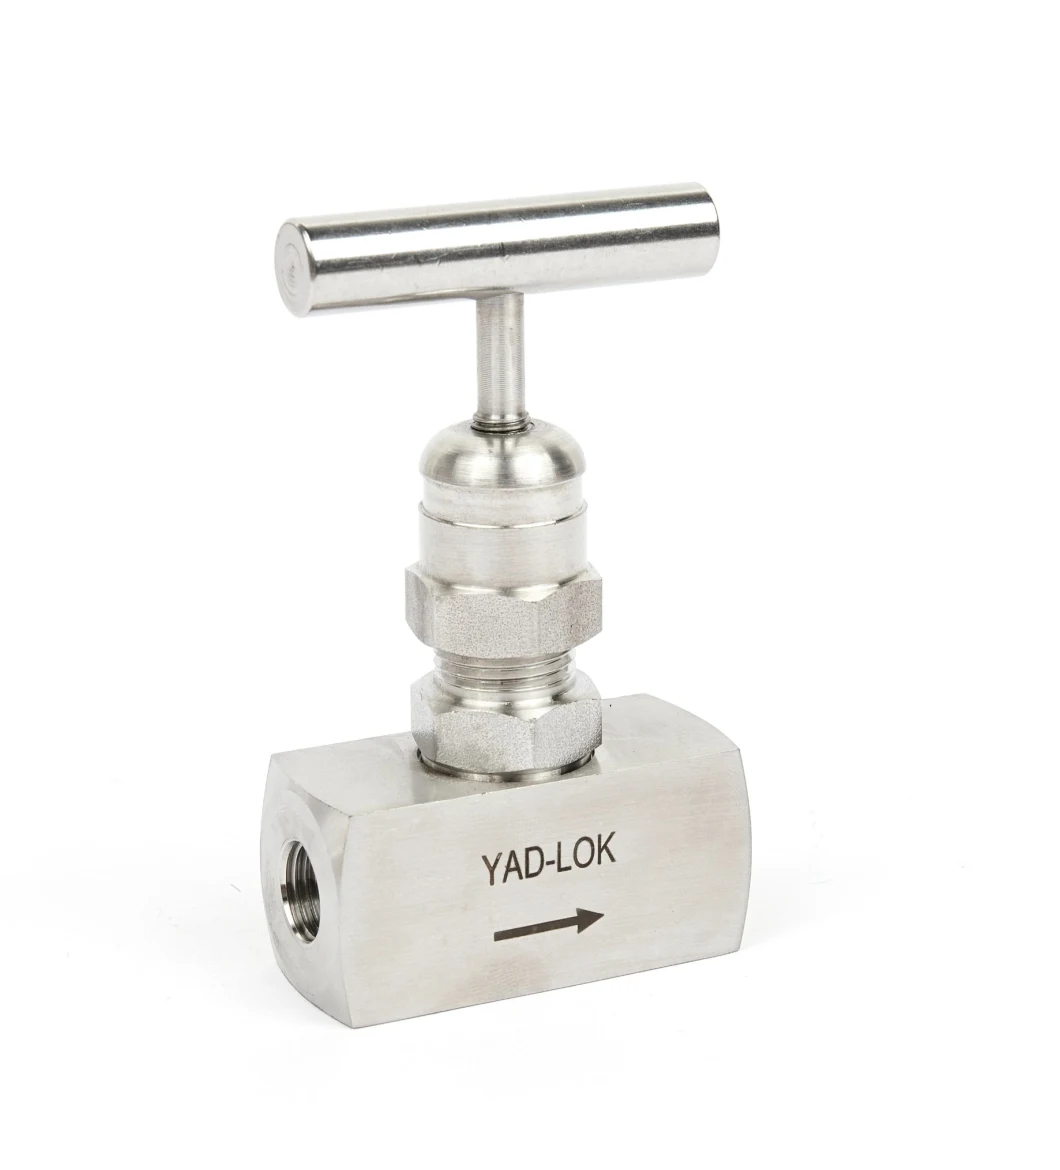 High Temperature Thread Stainless Steel SS304 SS316 Forged Female Needle Valve